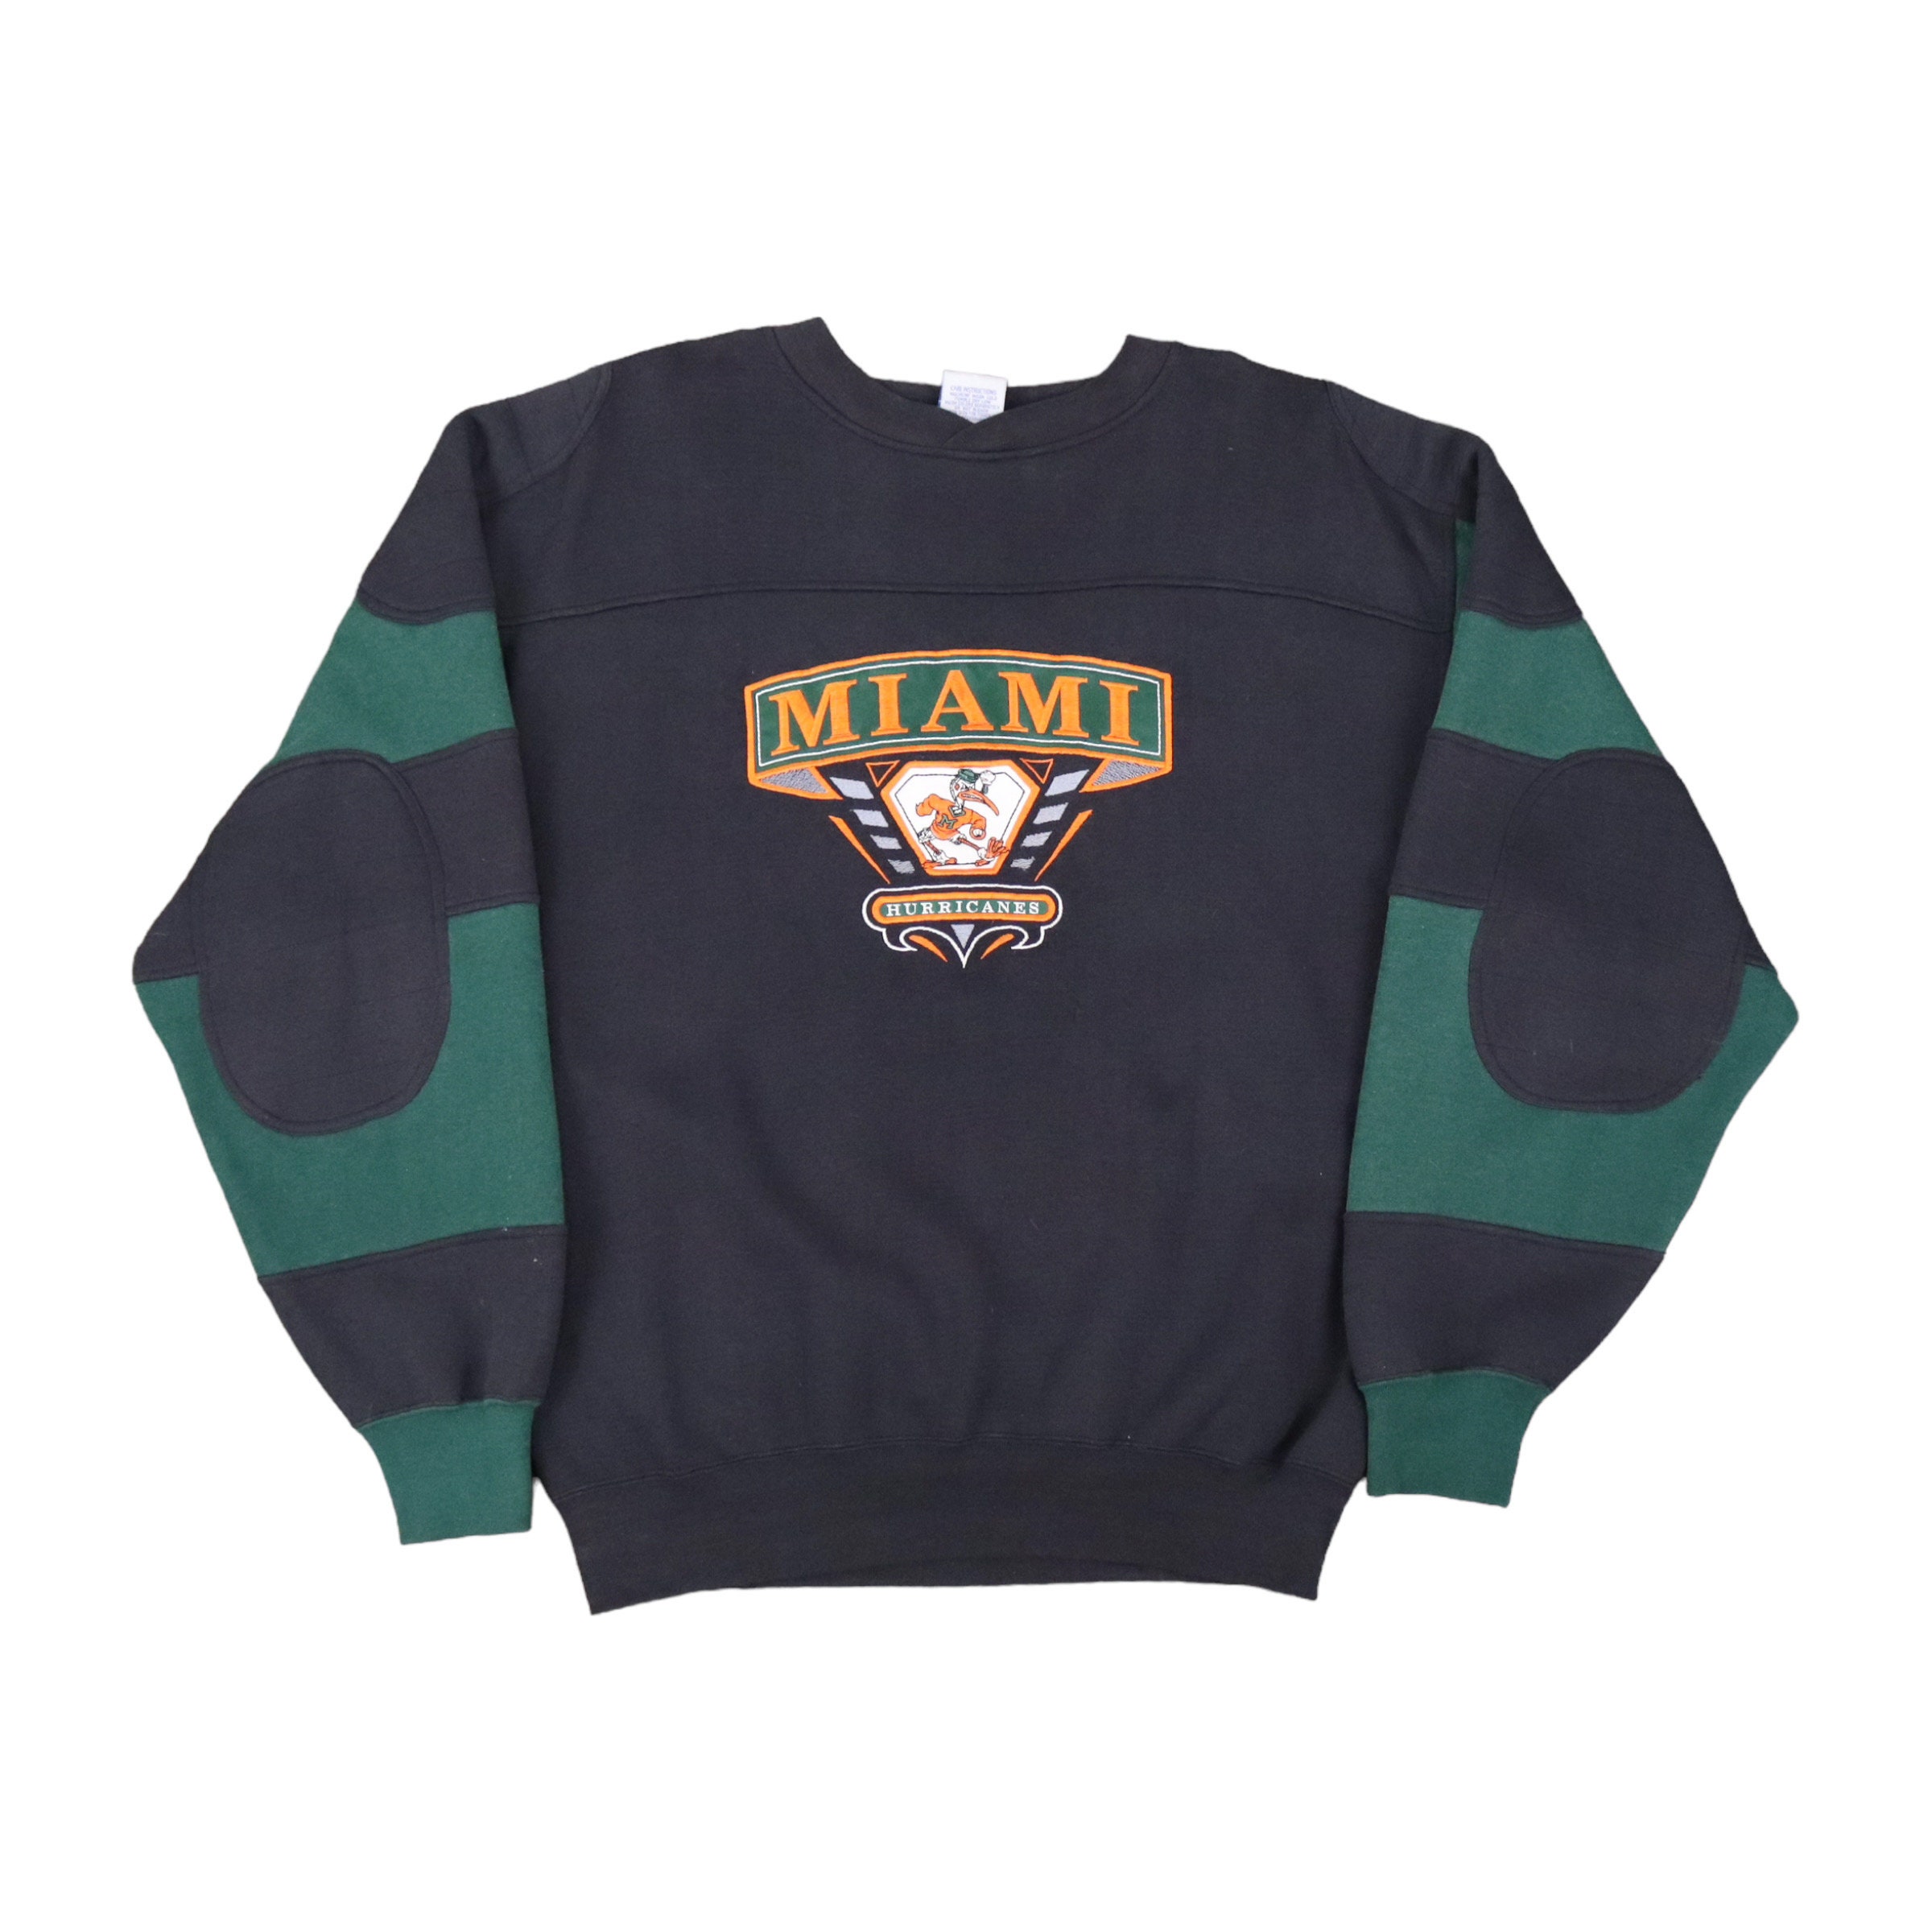 Miami Hurricanes Sweater Mens XL Vintage Y2K College Football Embroidered